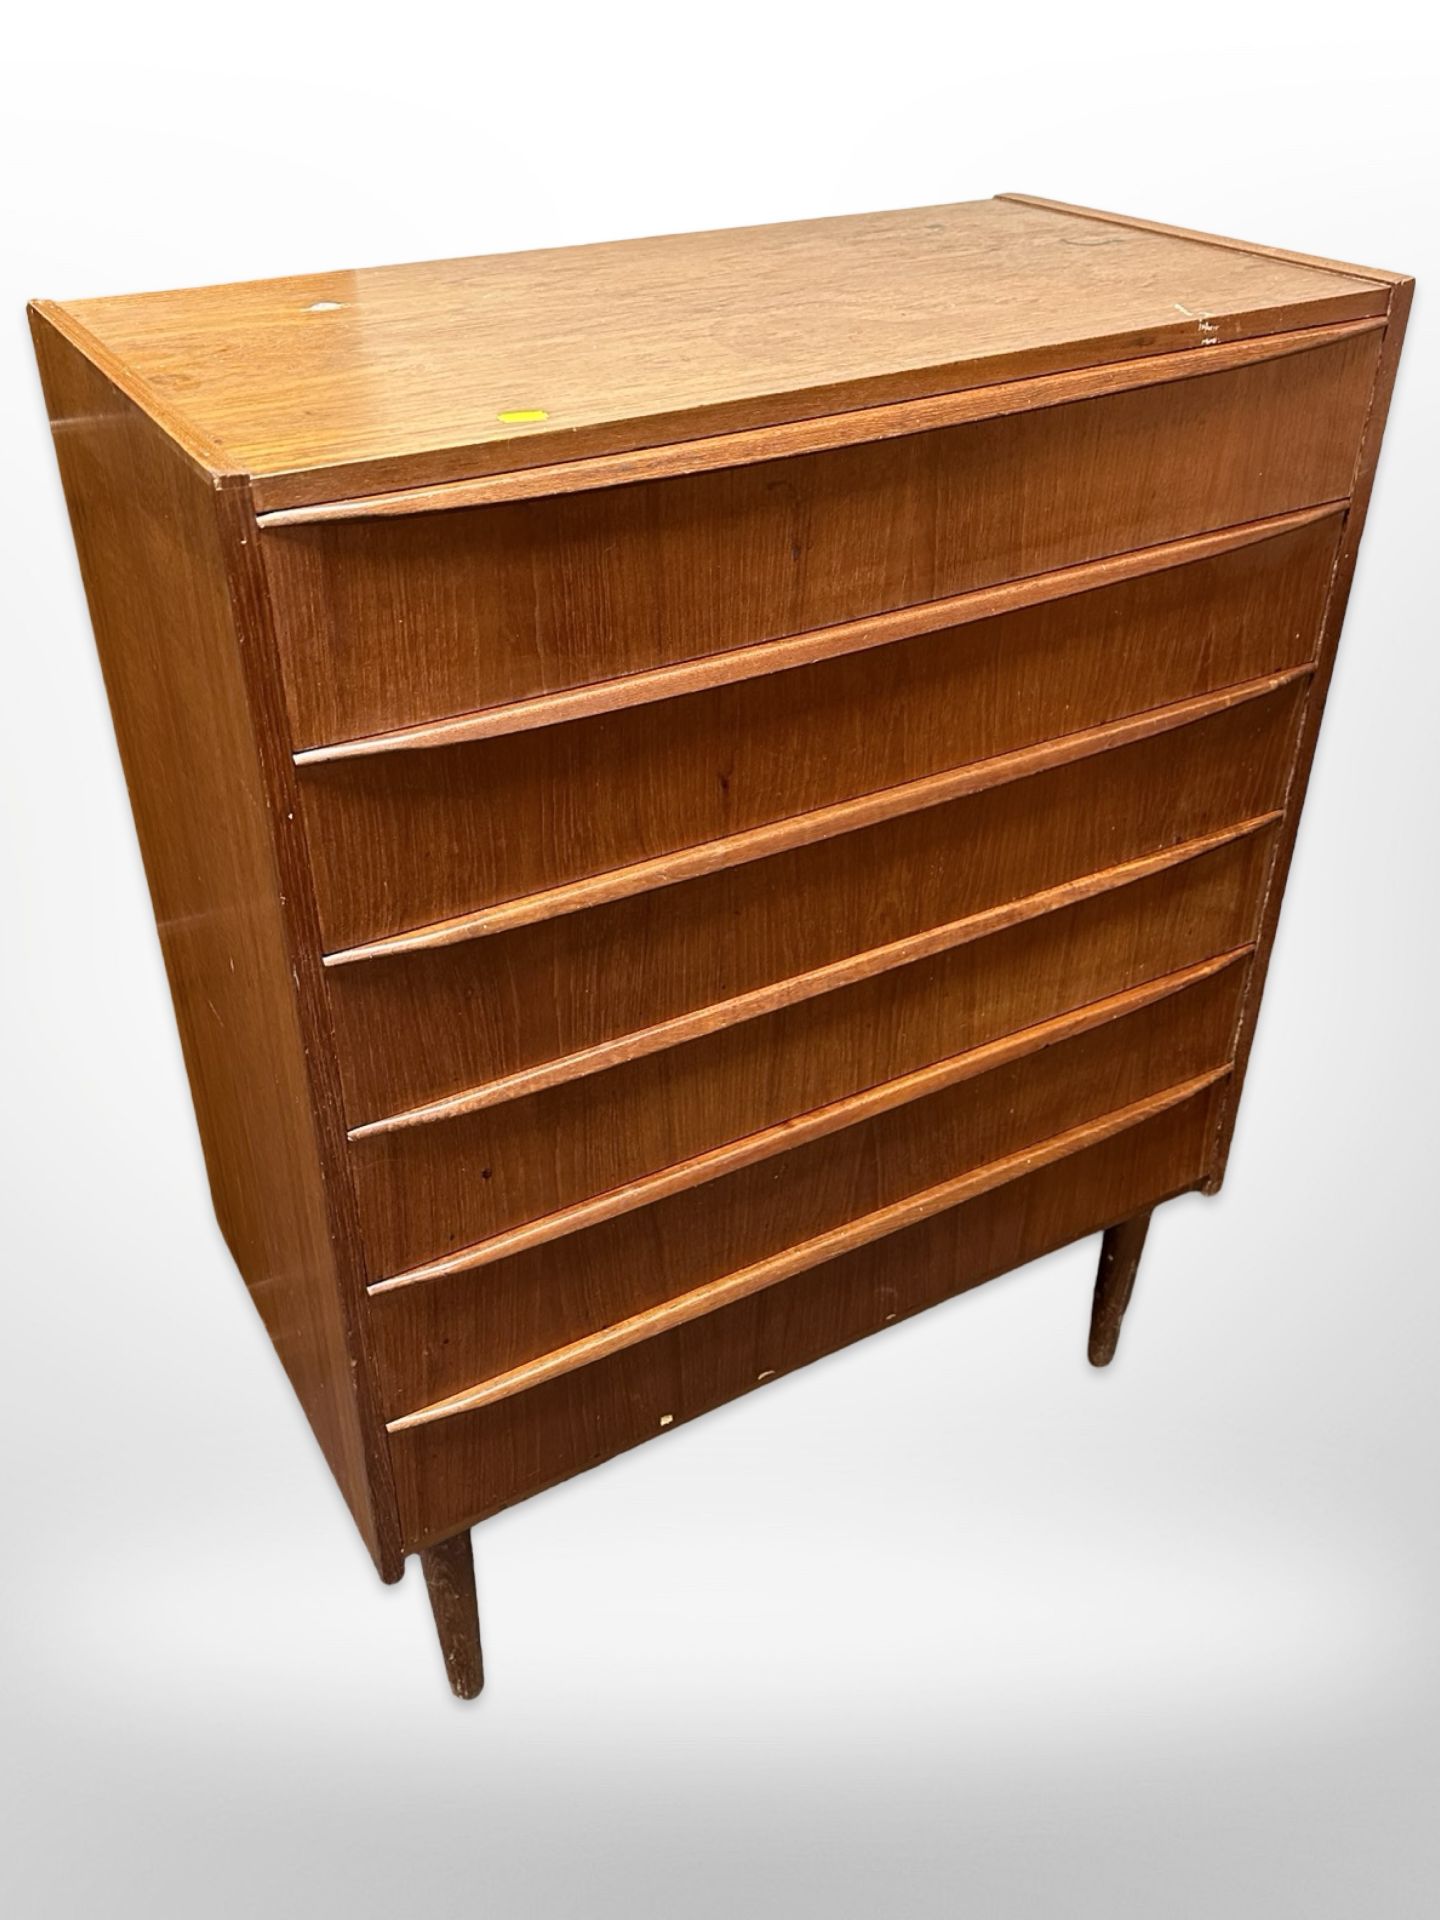 A 20th century Danish teak and pine six drawer chest on tapered legs,